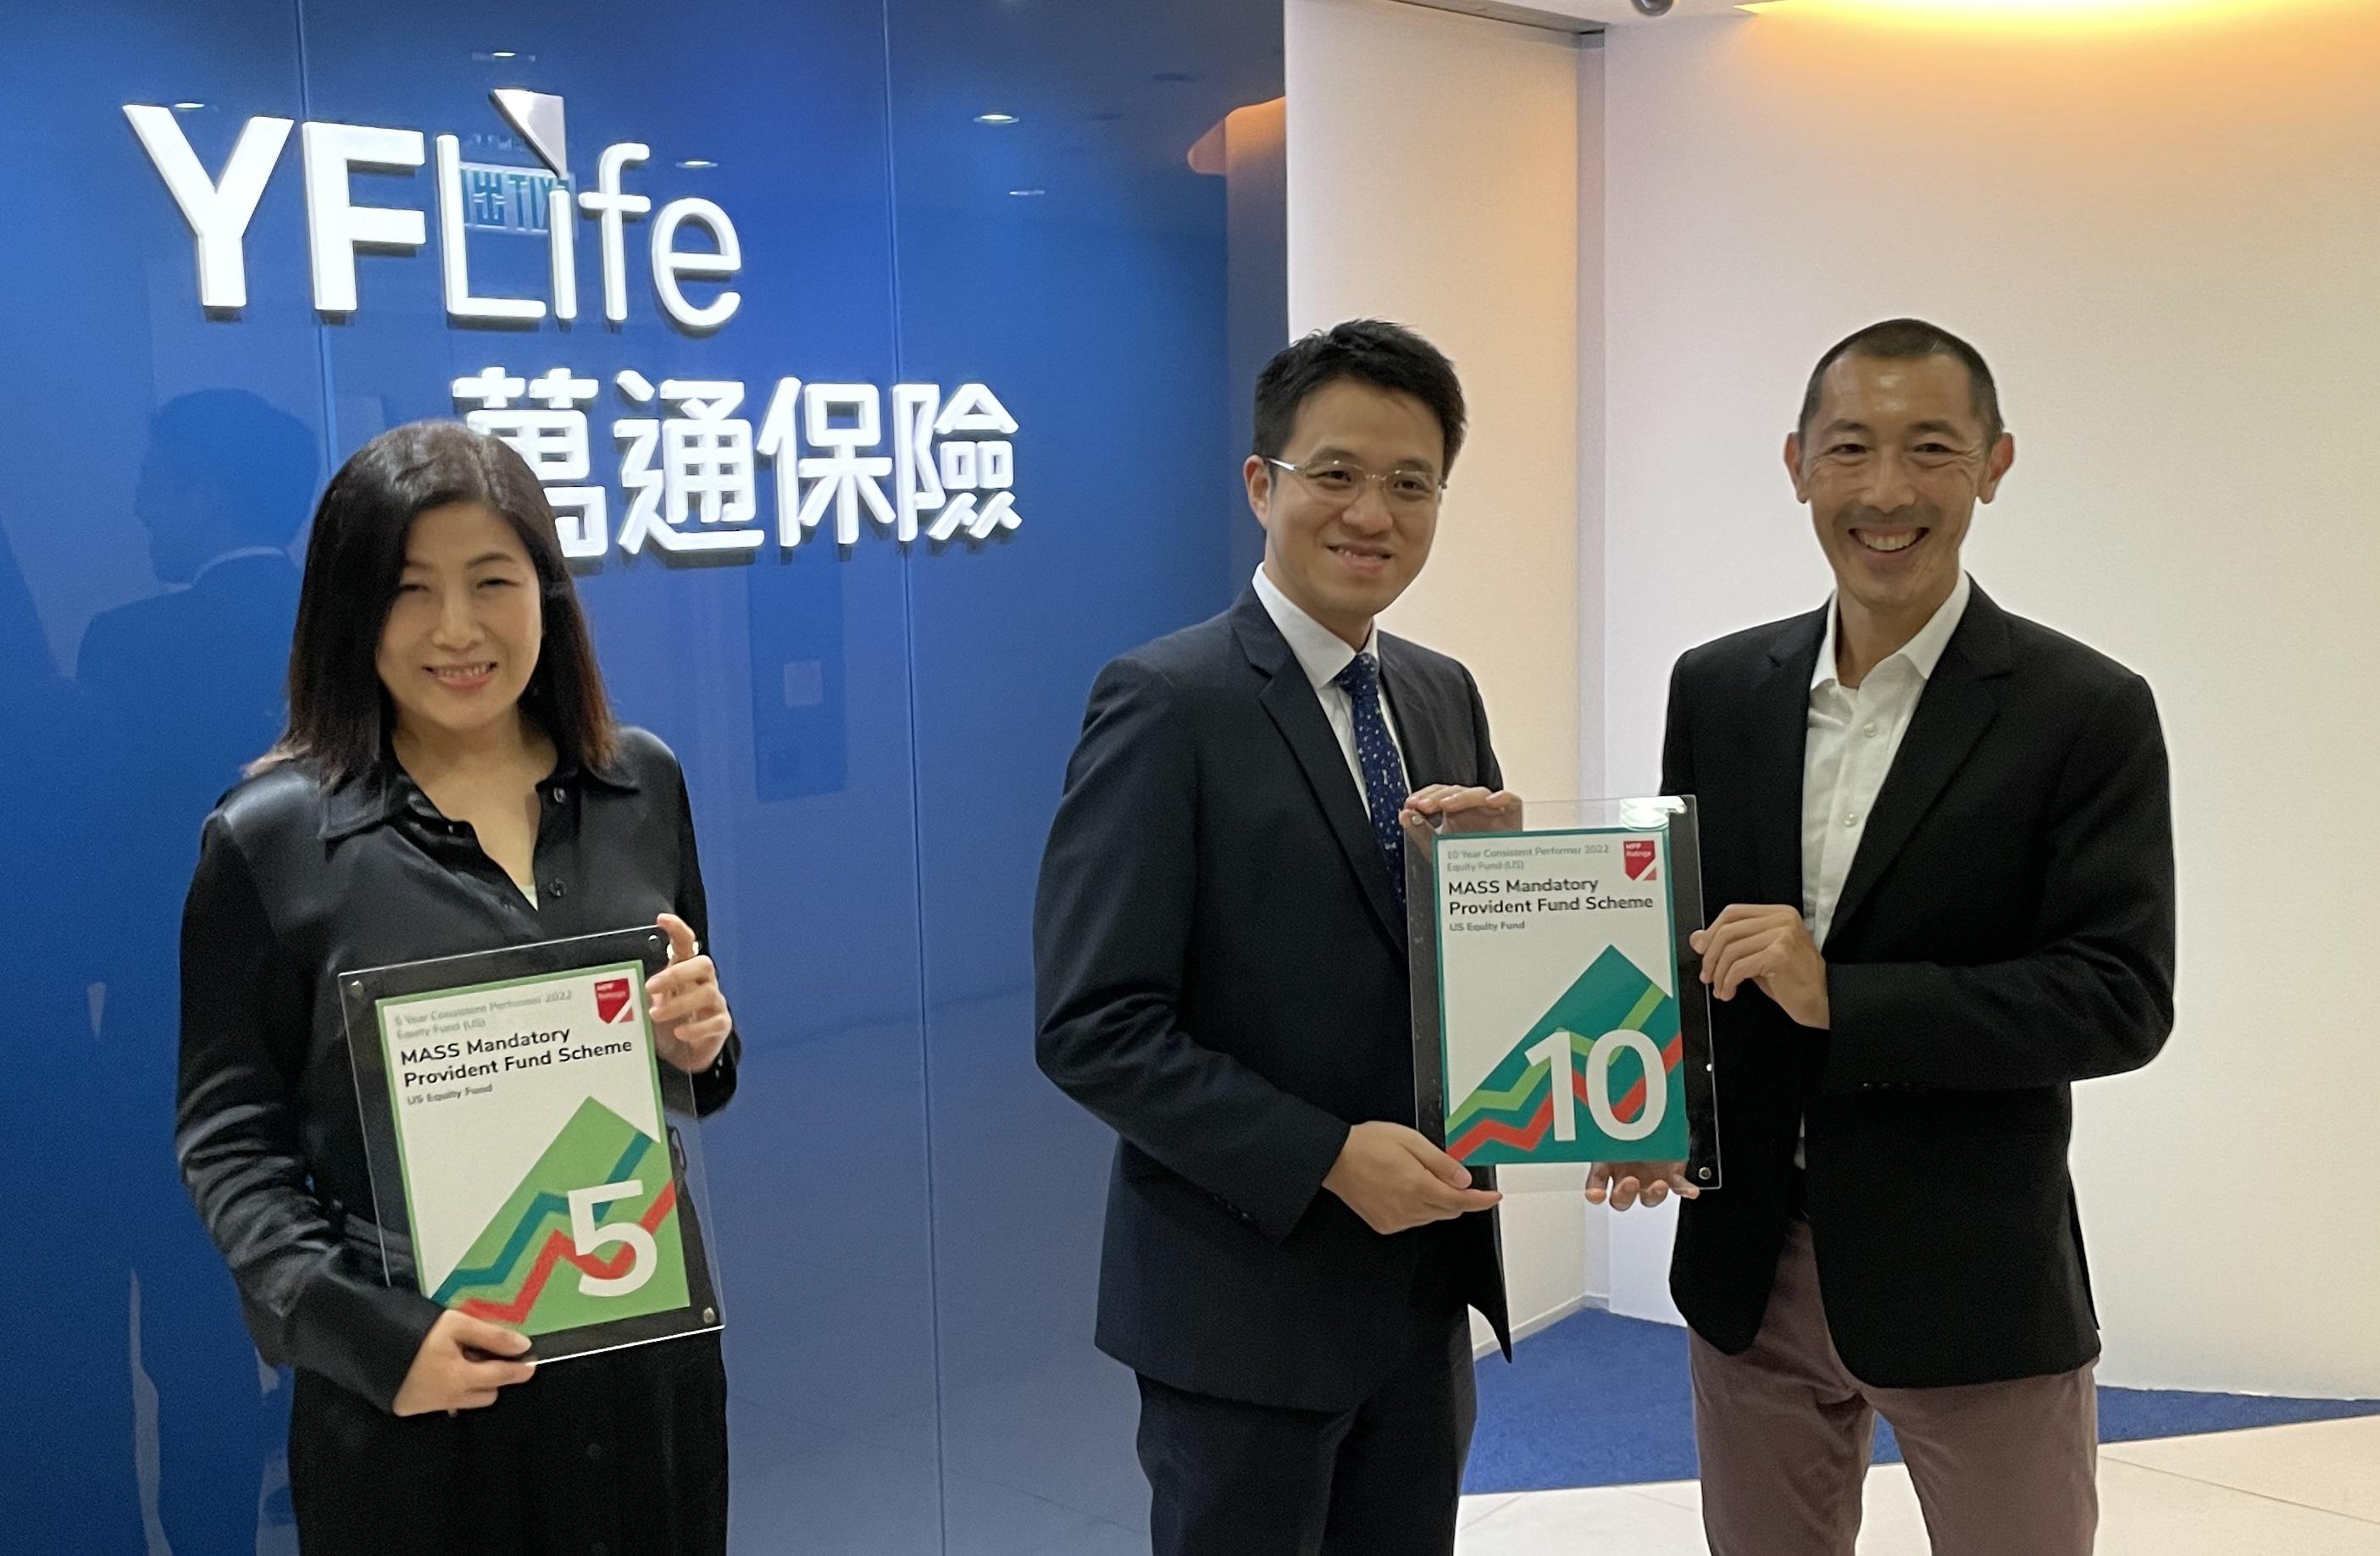 Mr. Francis Chung, Chairman of MPF Ratings (on the right), presents the awards of “MPF Ratings Consistent Performers” to Mr. Alvin Tse, Head of Pension & Employee Benefits (in the middle) and Ms. Rita Yee, Business Director of Pension & Employee Benefits (on the left).